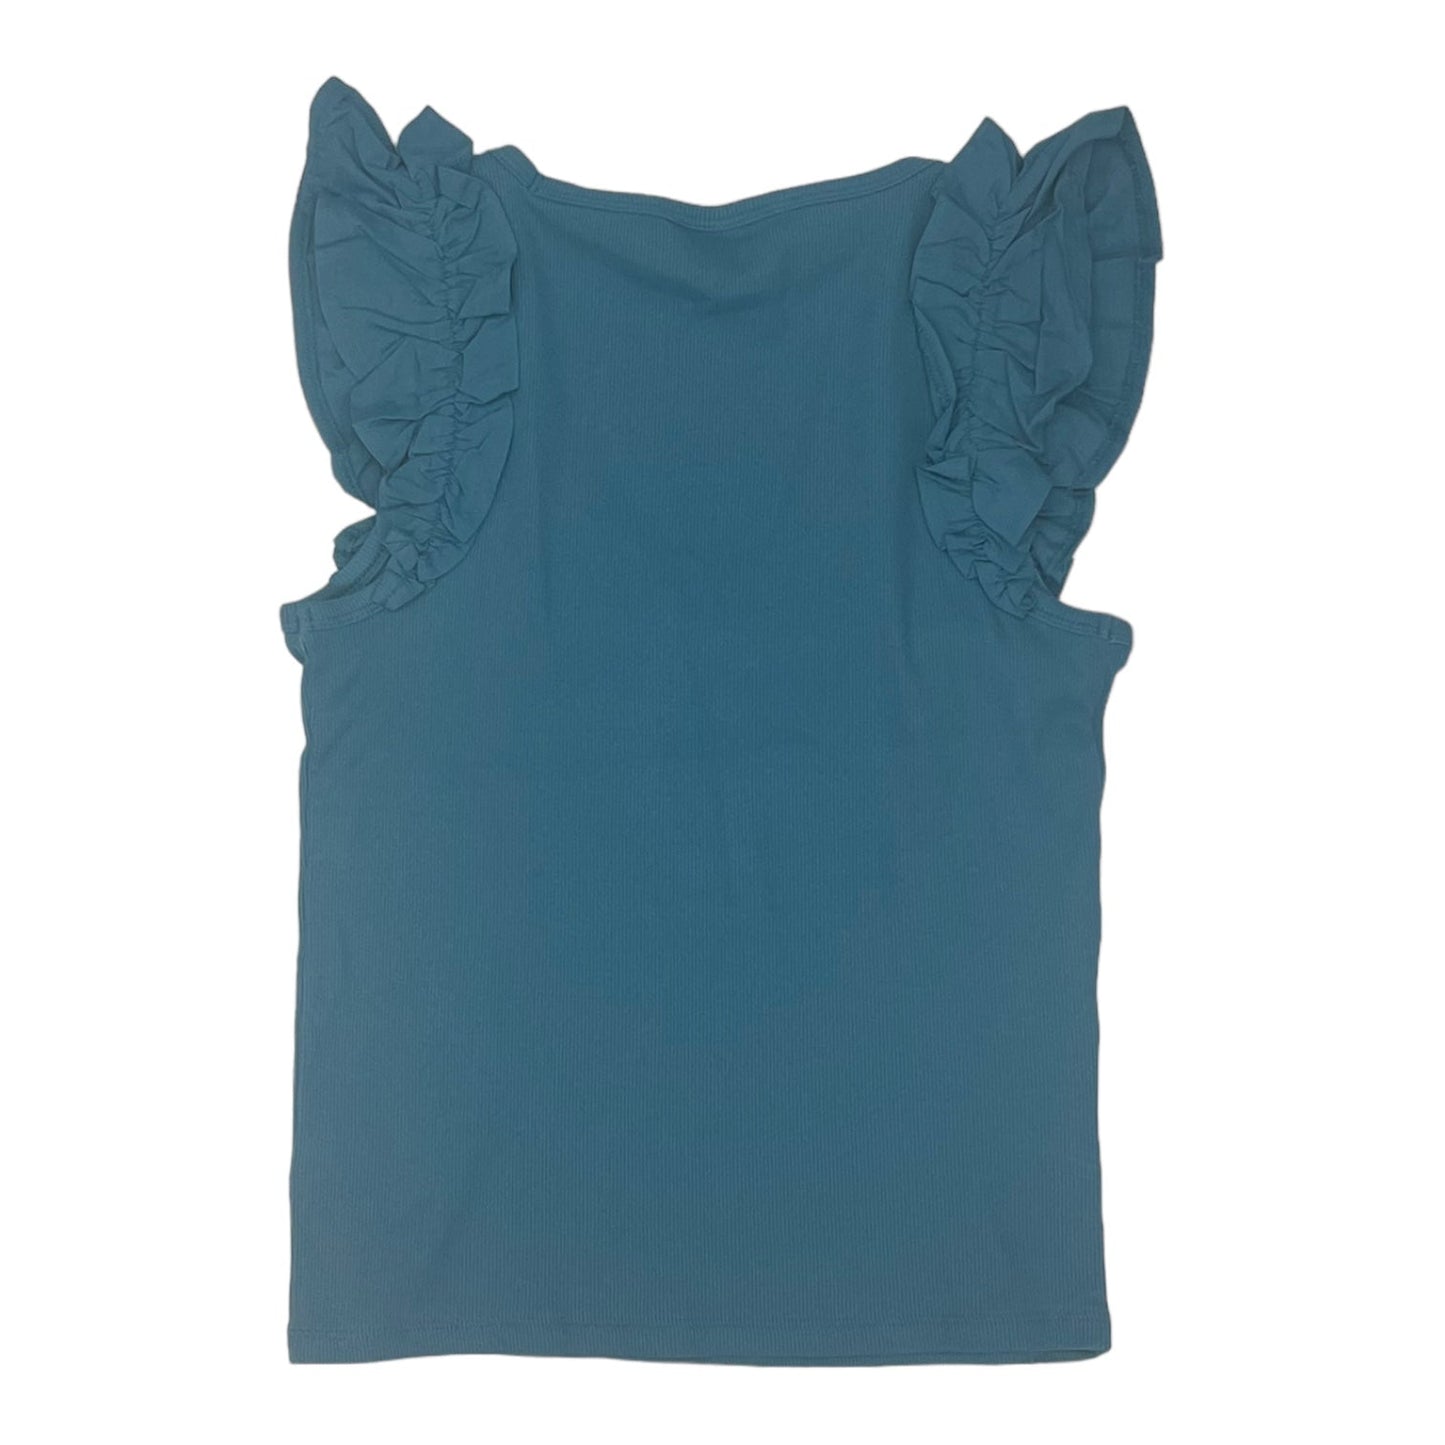 TEAL OLD NAVY TOP SS, Size M